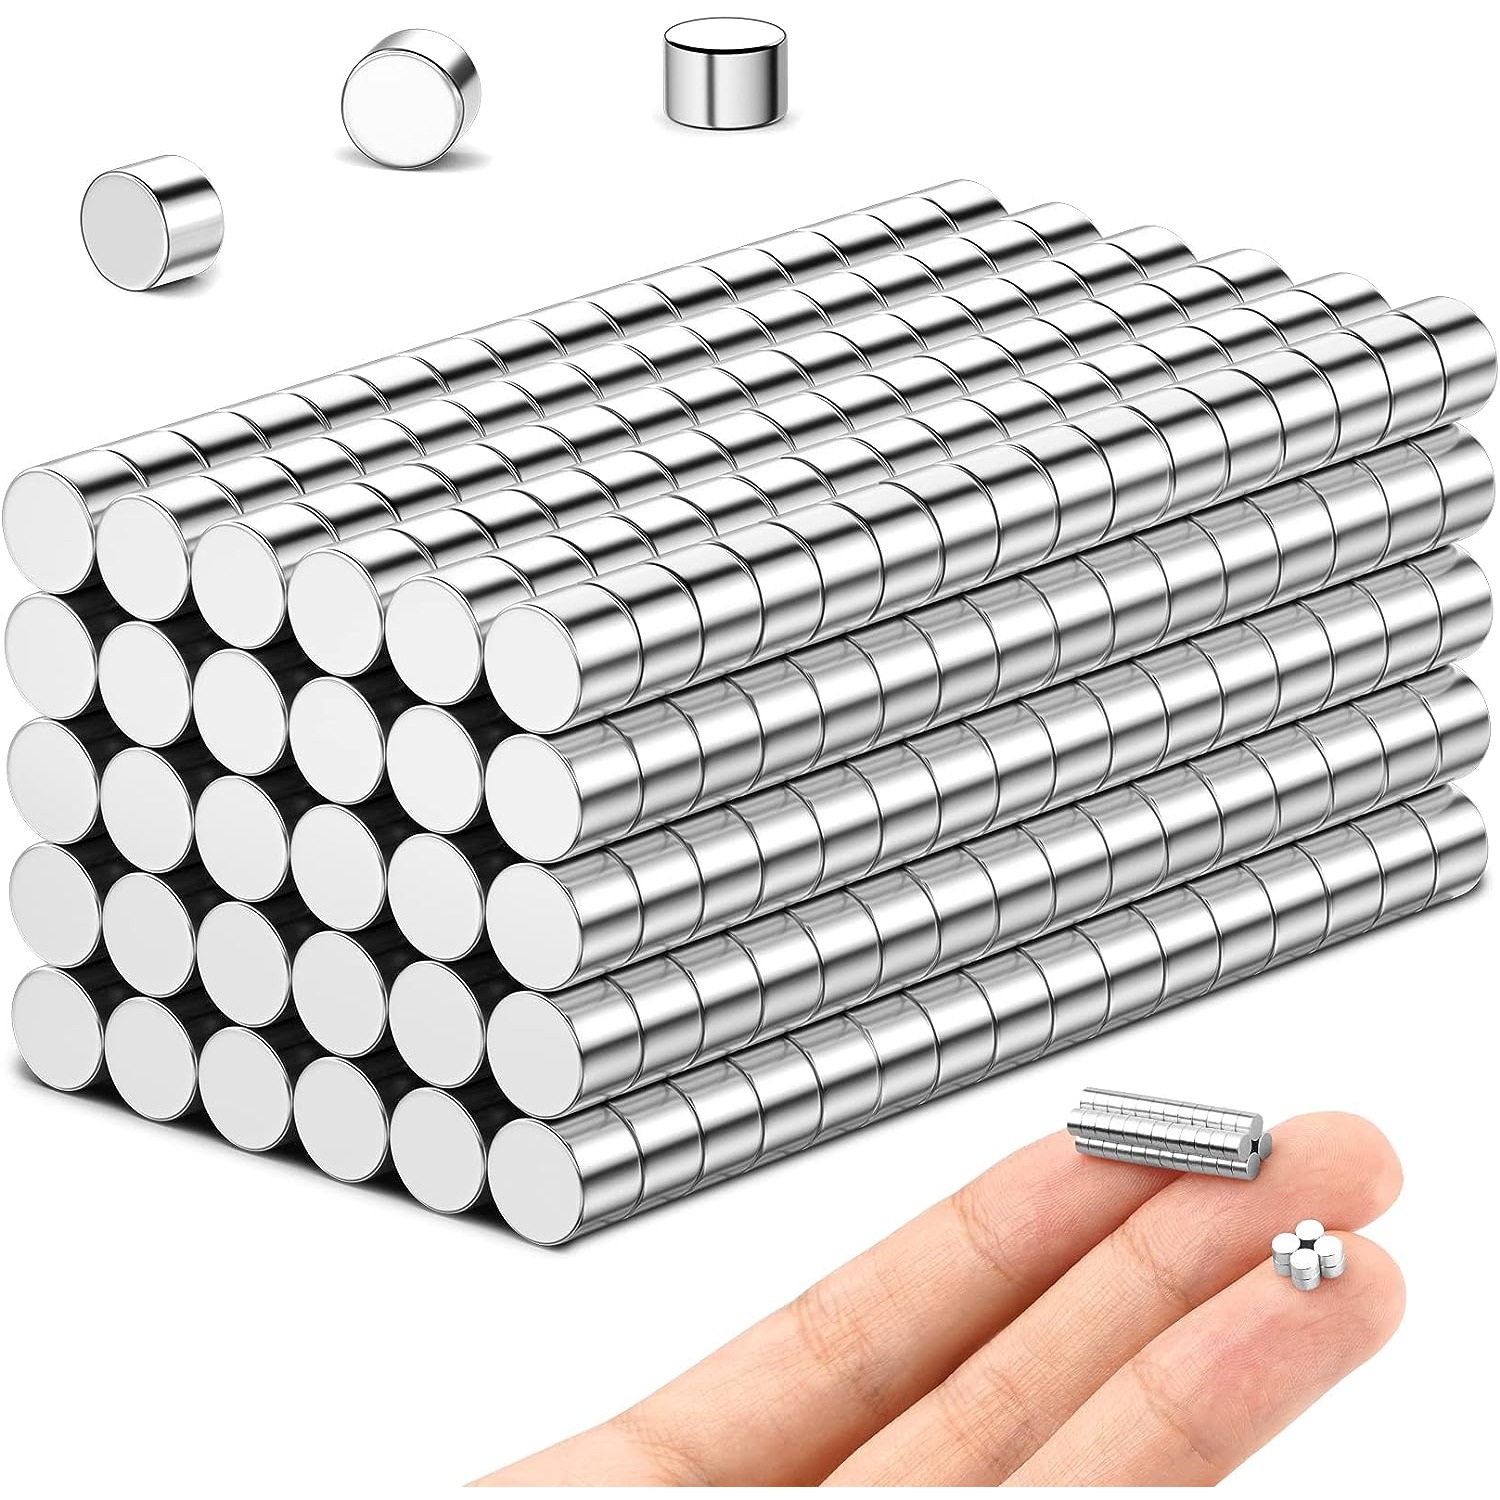 THCMagorilla Strong Neodymium Magnets, Rare Earth Magnets for Crafts, Small  Magnets for Whiteboard, Heavy Duty Magnets, Mini Magnets, Tiny Magnets